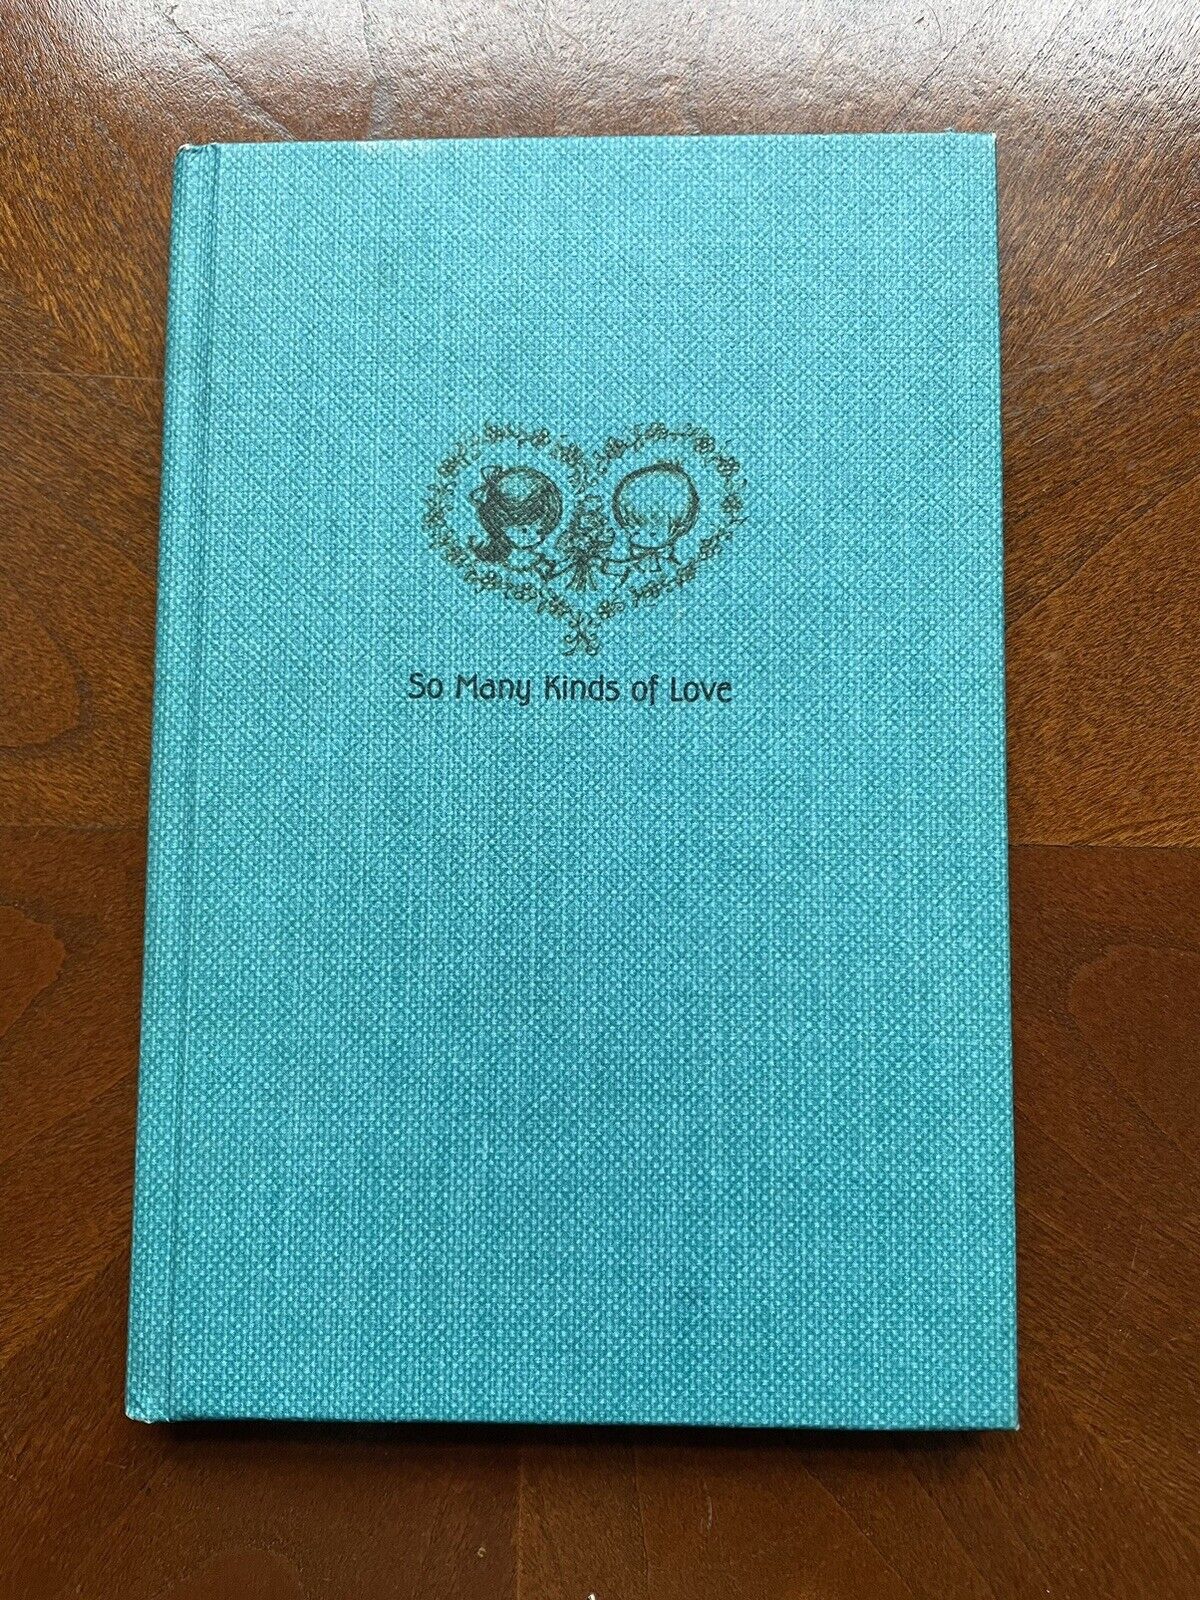 Vtg 1968 So Many Kinds of Love Hallmark Book HC with DJ  Dean Walley B. White